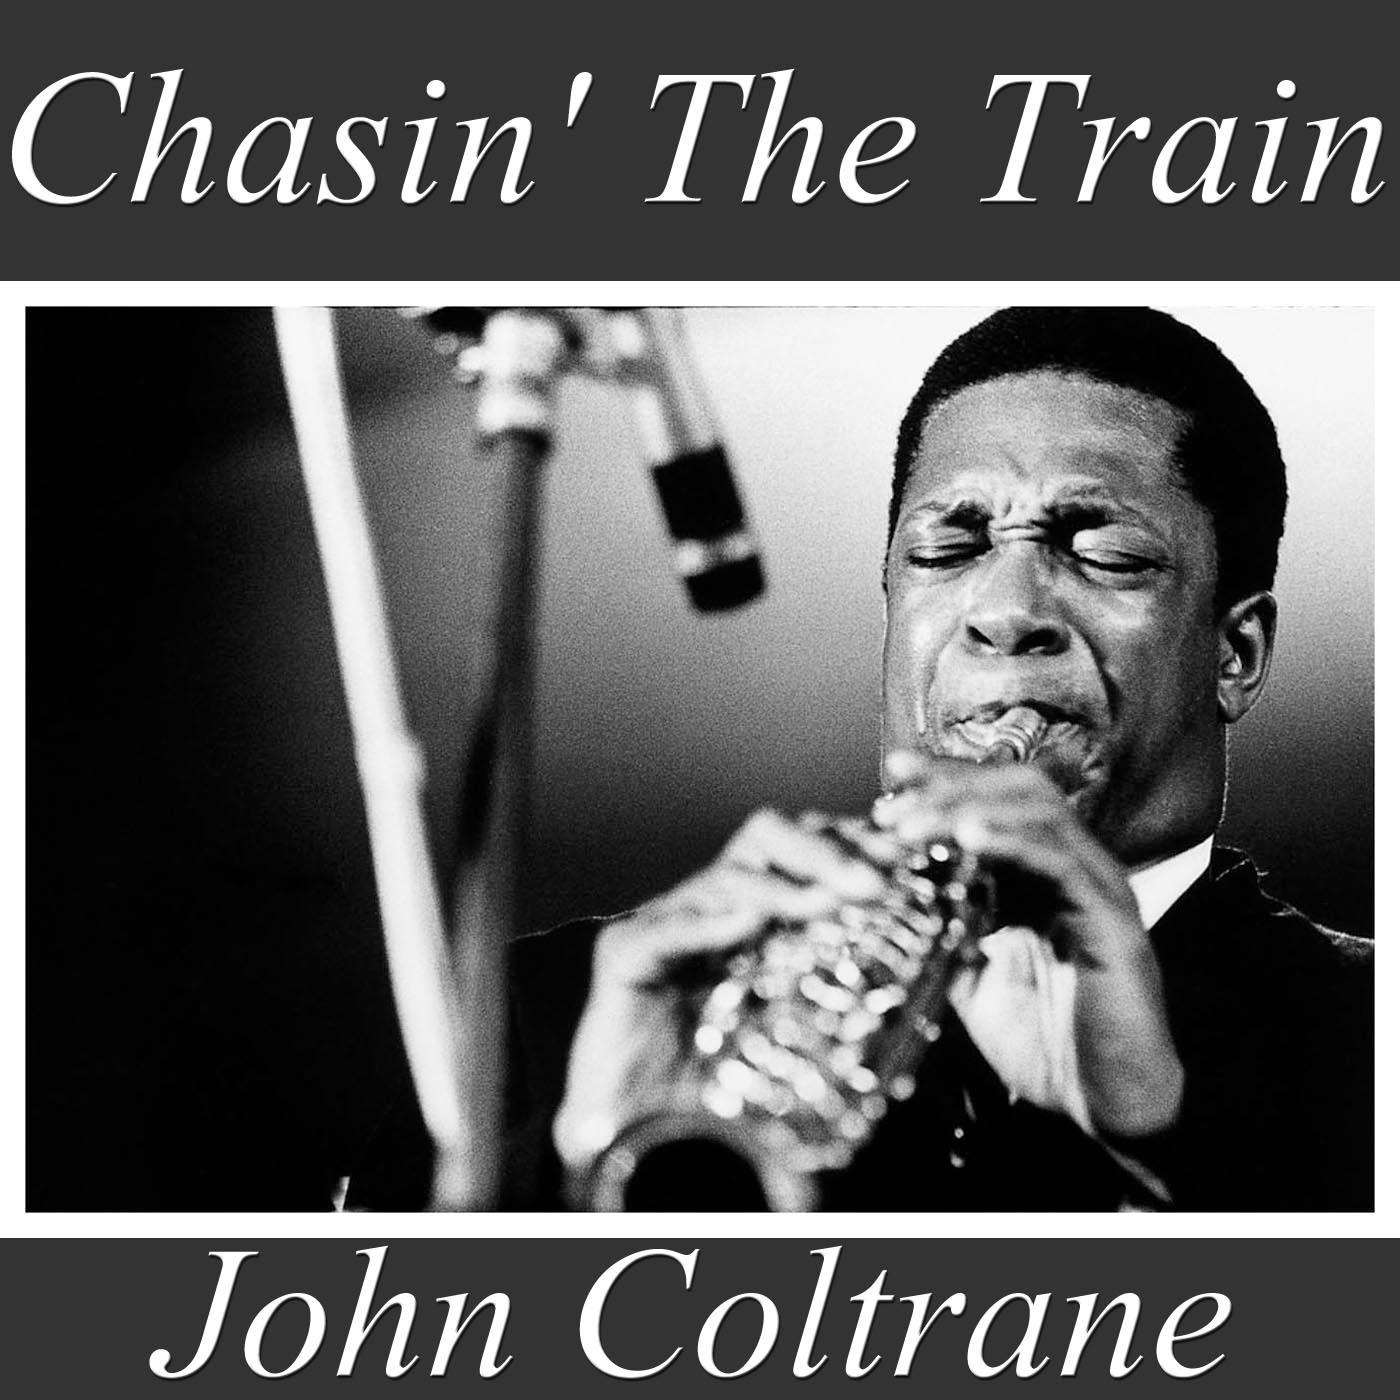 Chasin' Another Trane (Live)